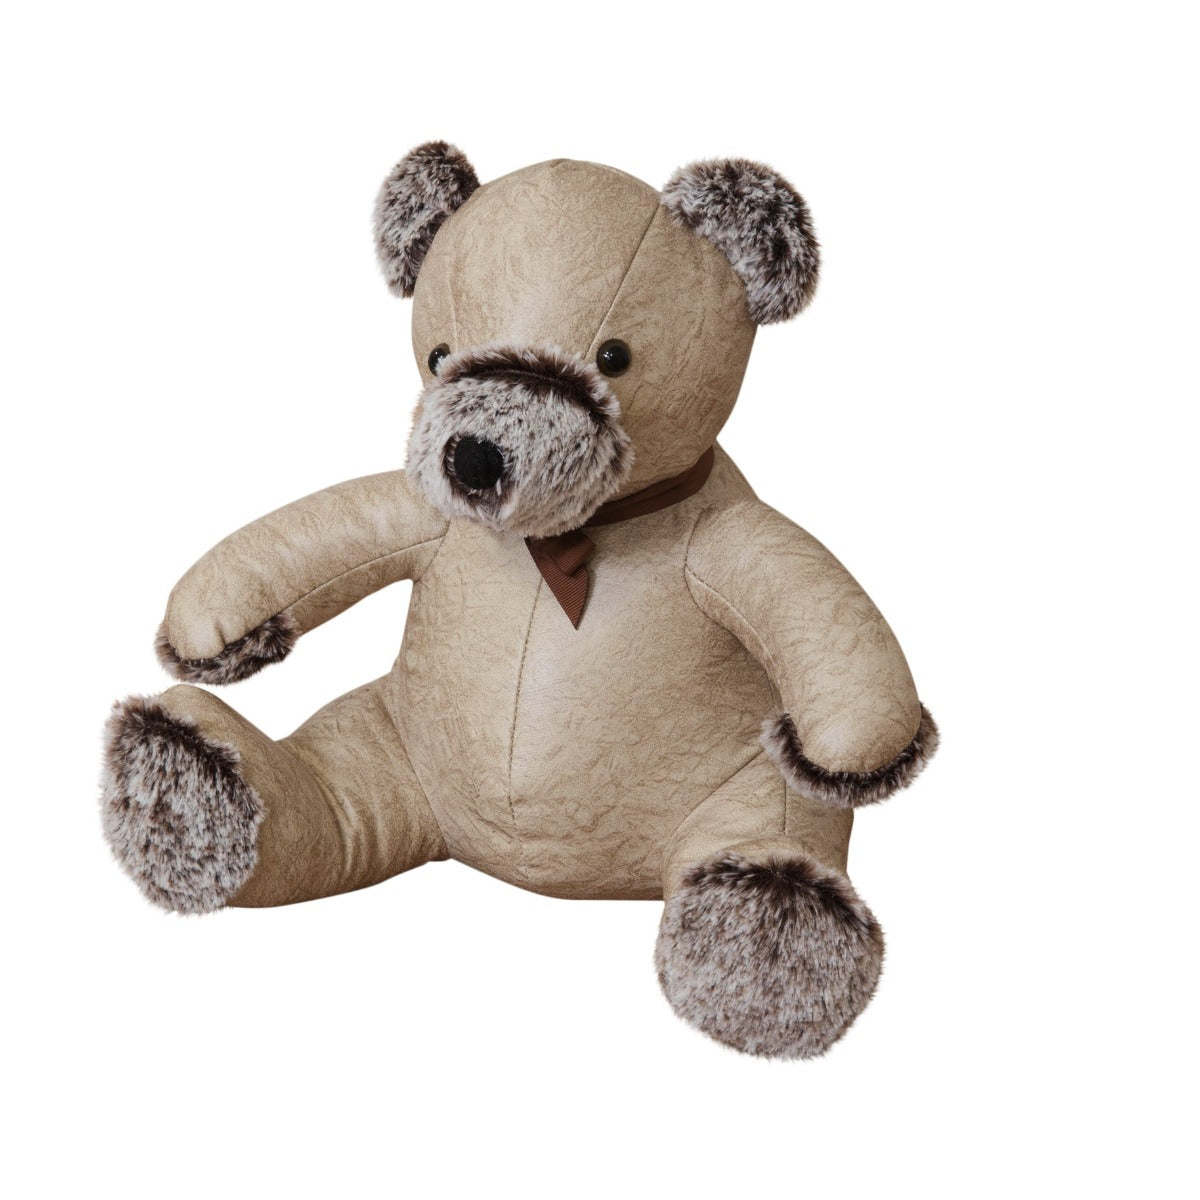 Door Stop - Beige Bear  Bring some warmth and charm to any room with this distressed beige faux leather teddy bear door stop. From the Nature Trail collection by HESTIA® - bring some subtle Spring vitality to your home.